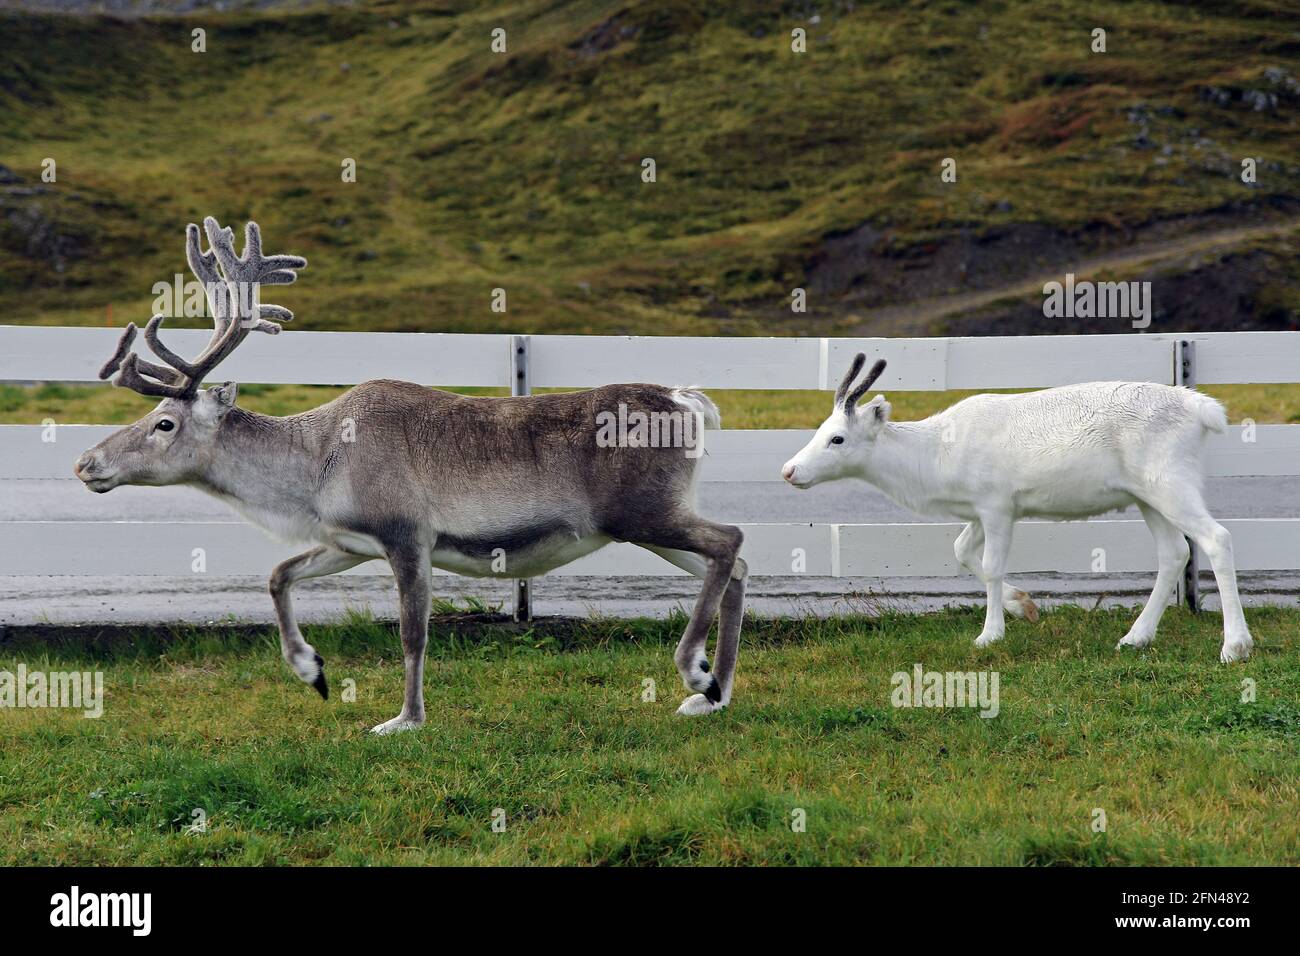 Reindeer mom and her son are walking near the fence. Country scene in northern norway. Cute baby white reindeer follows his mom. Stock Photo